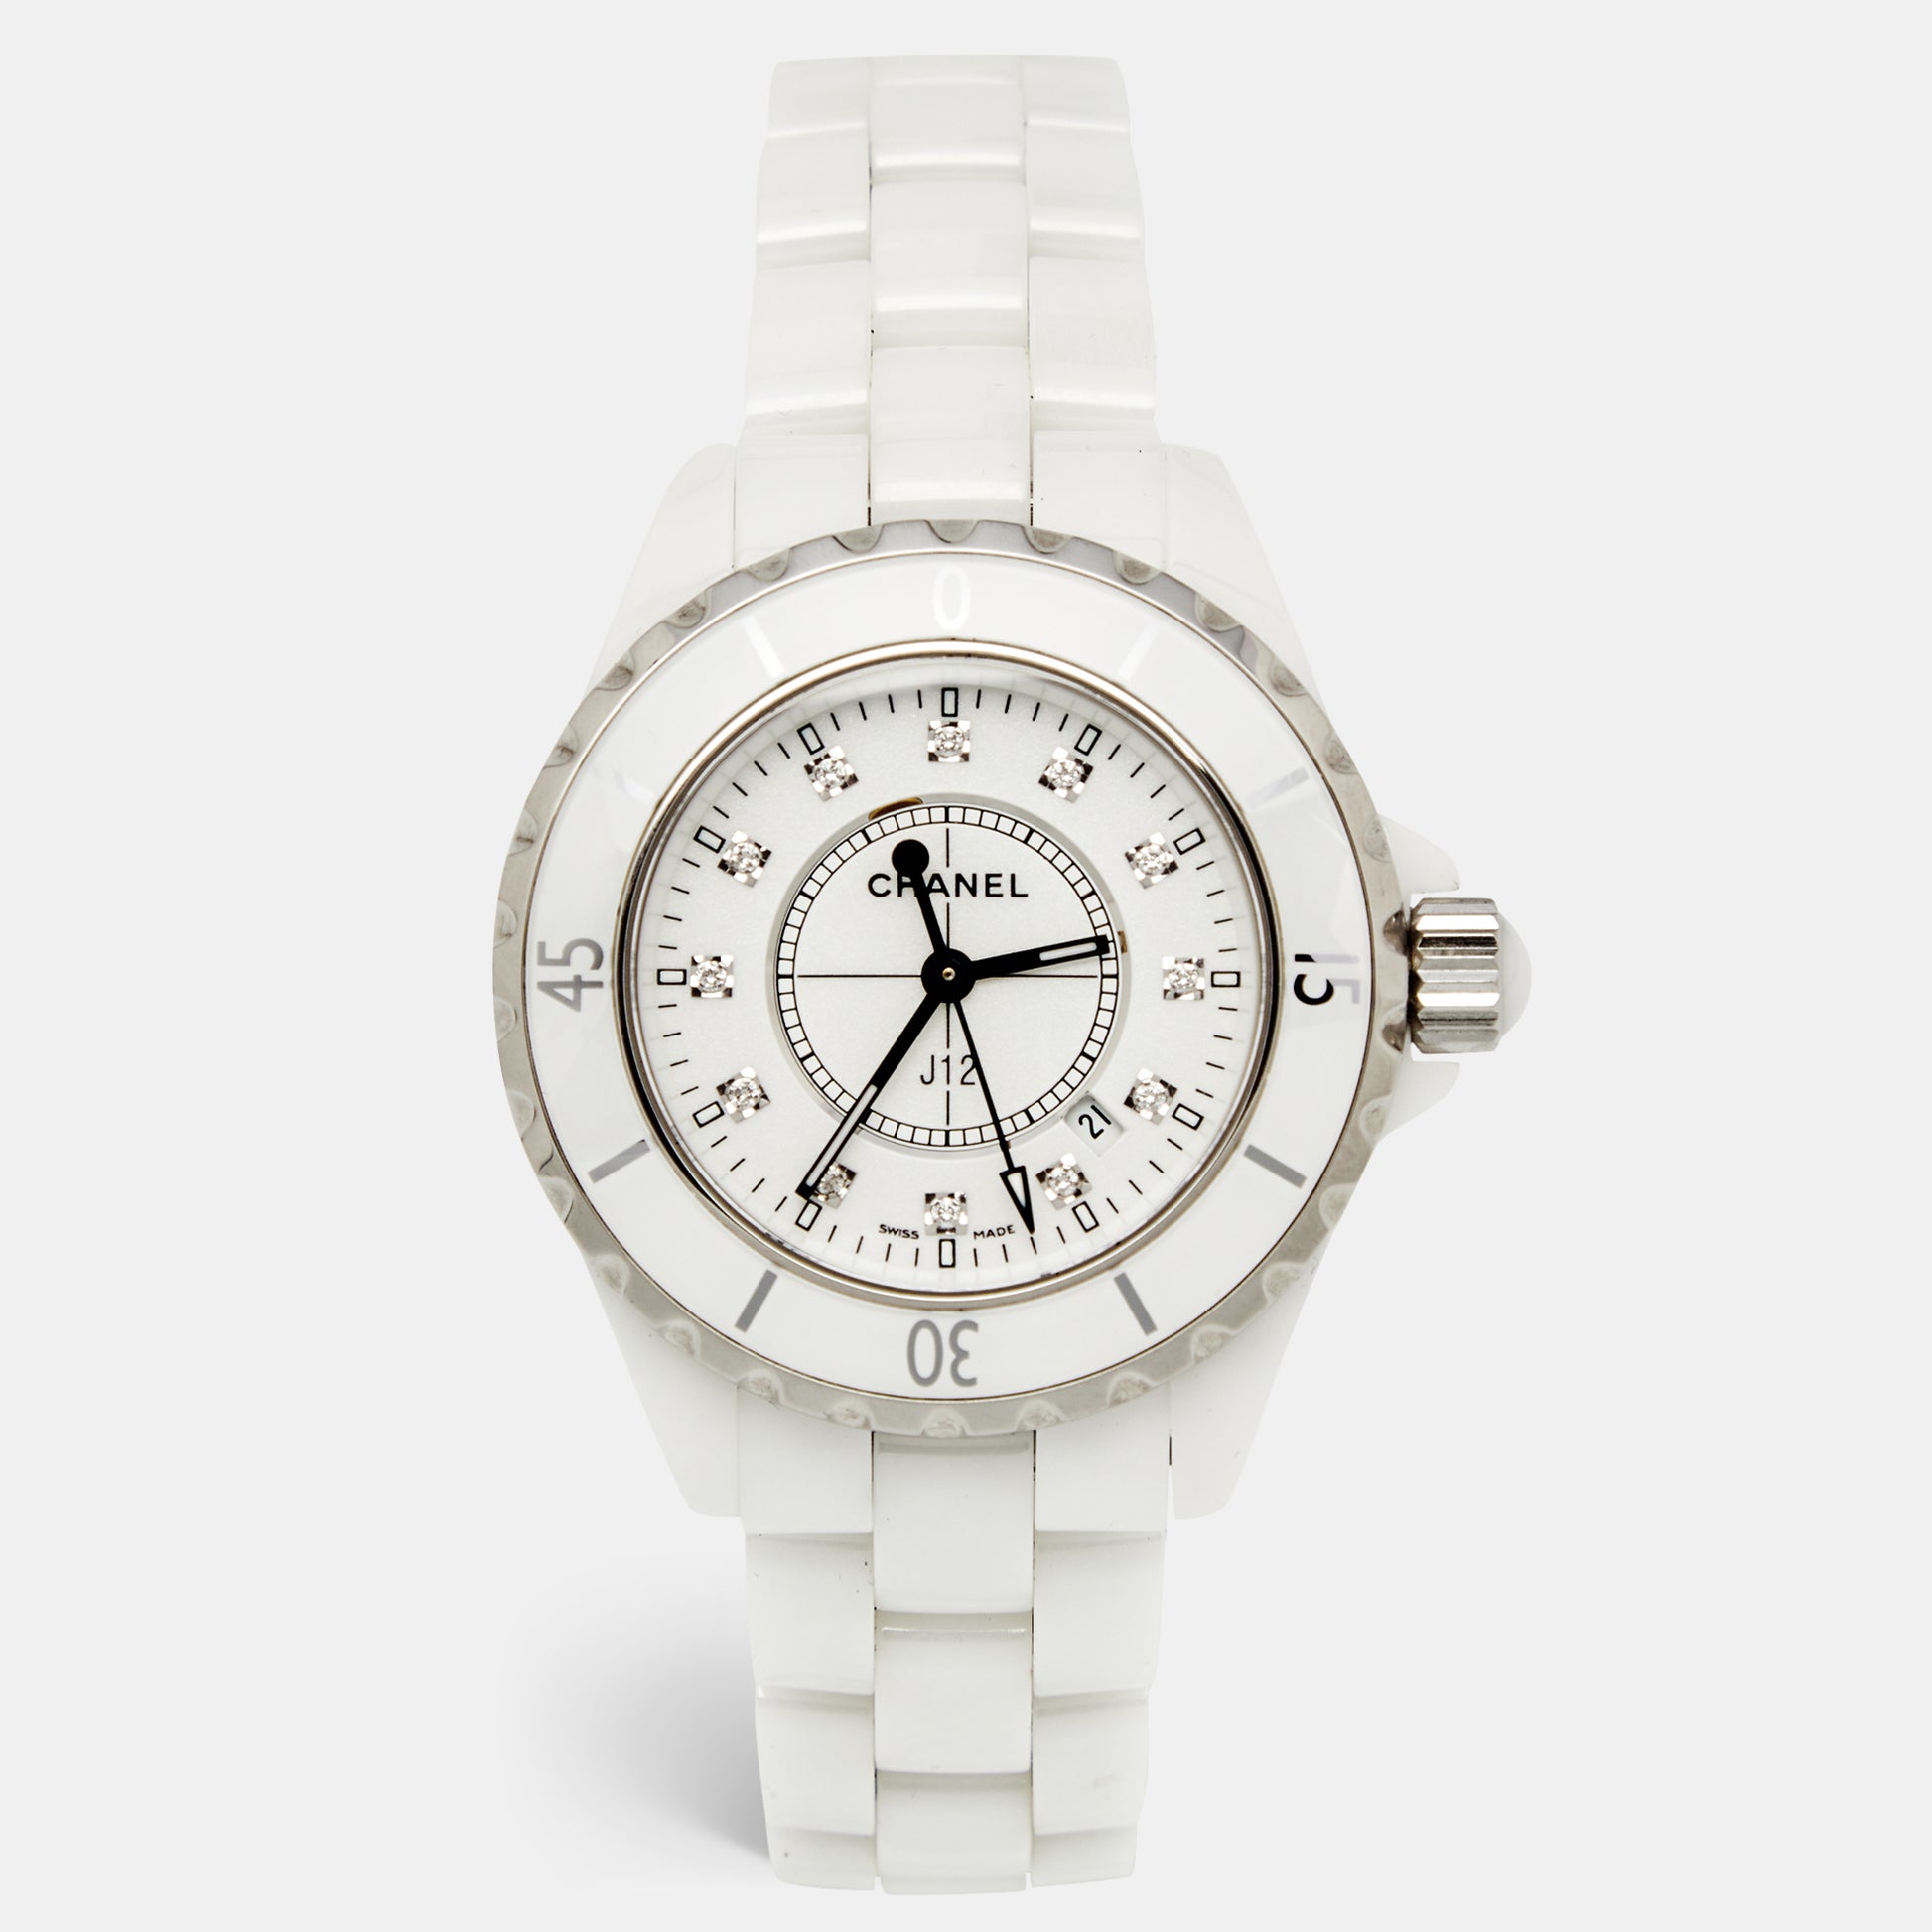 Chanel J12 white ceramic and stainless steel watch